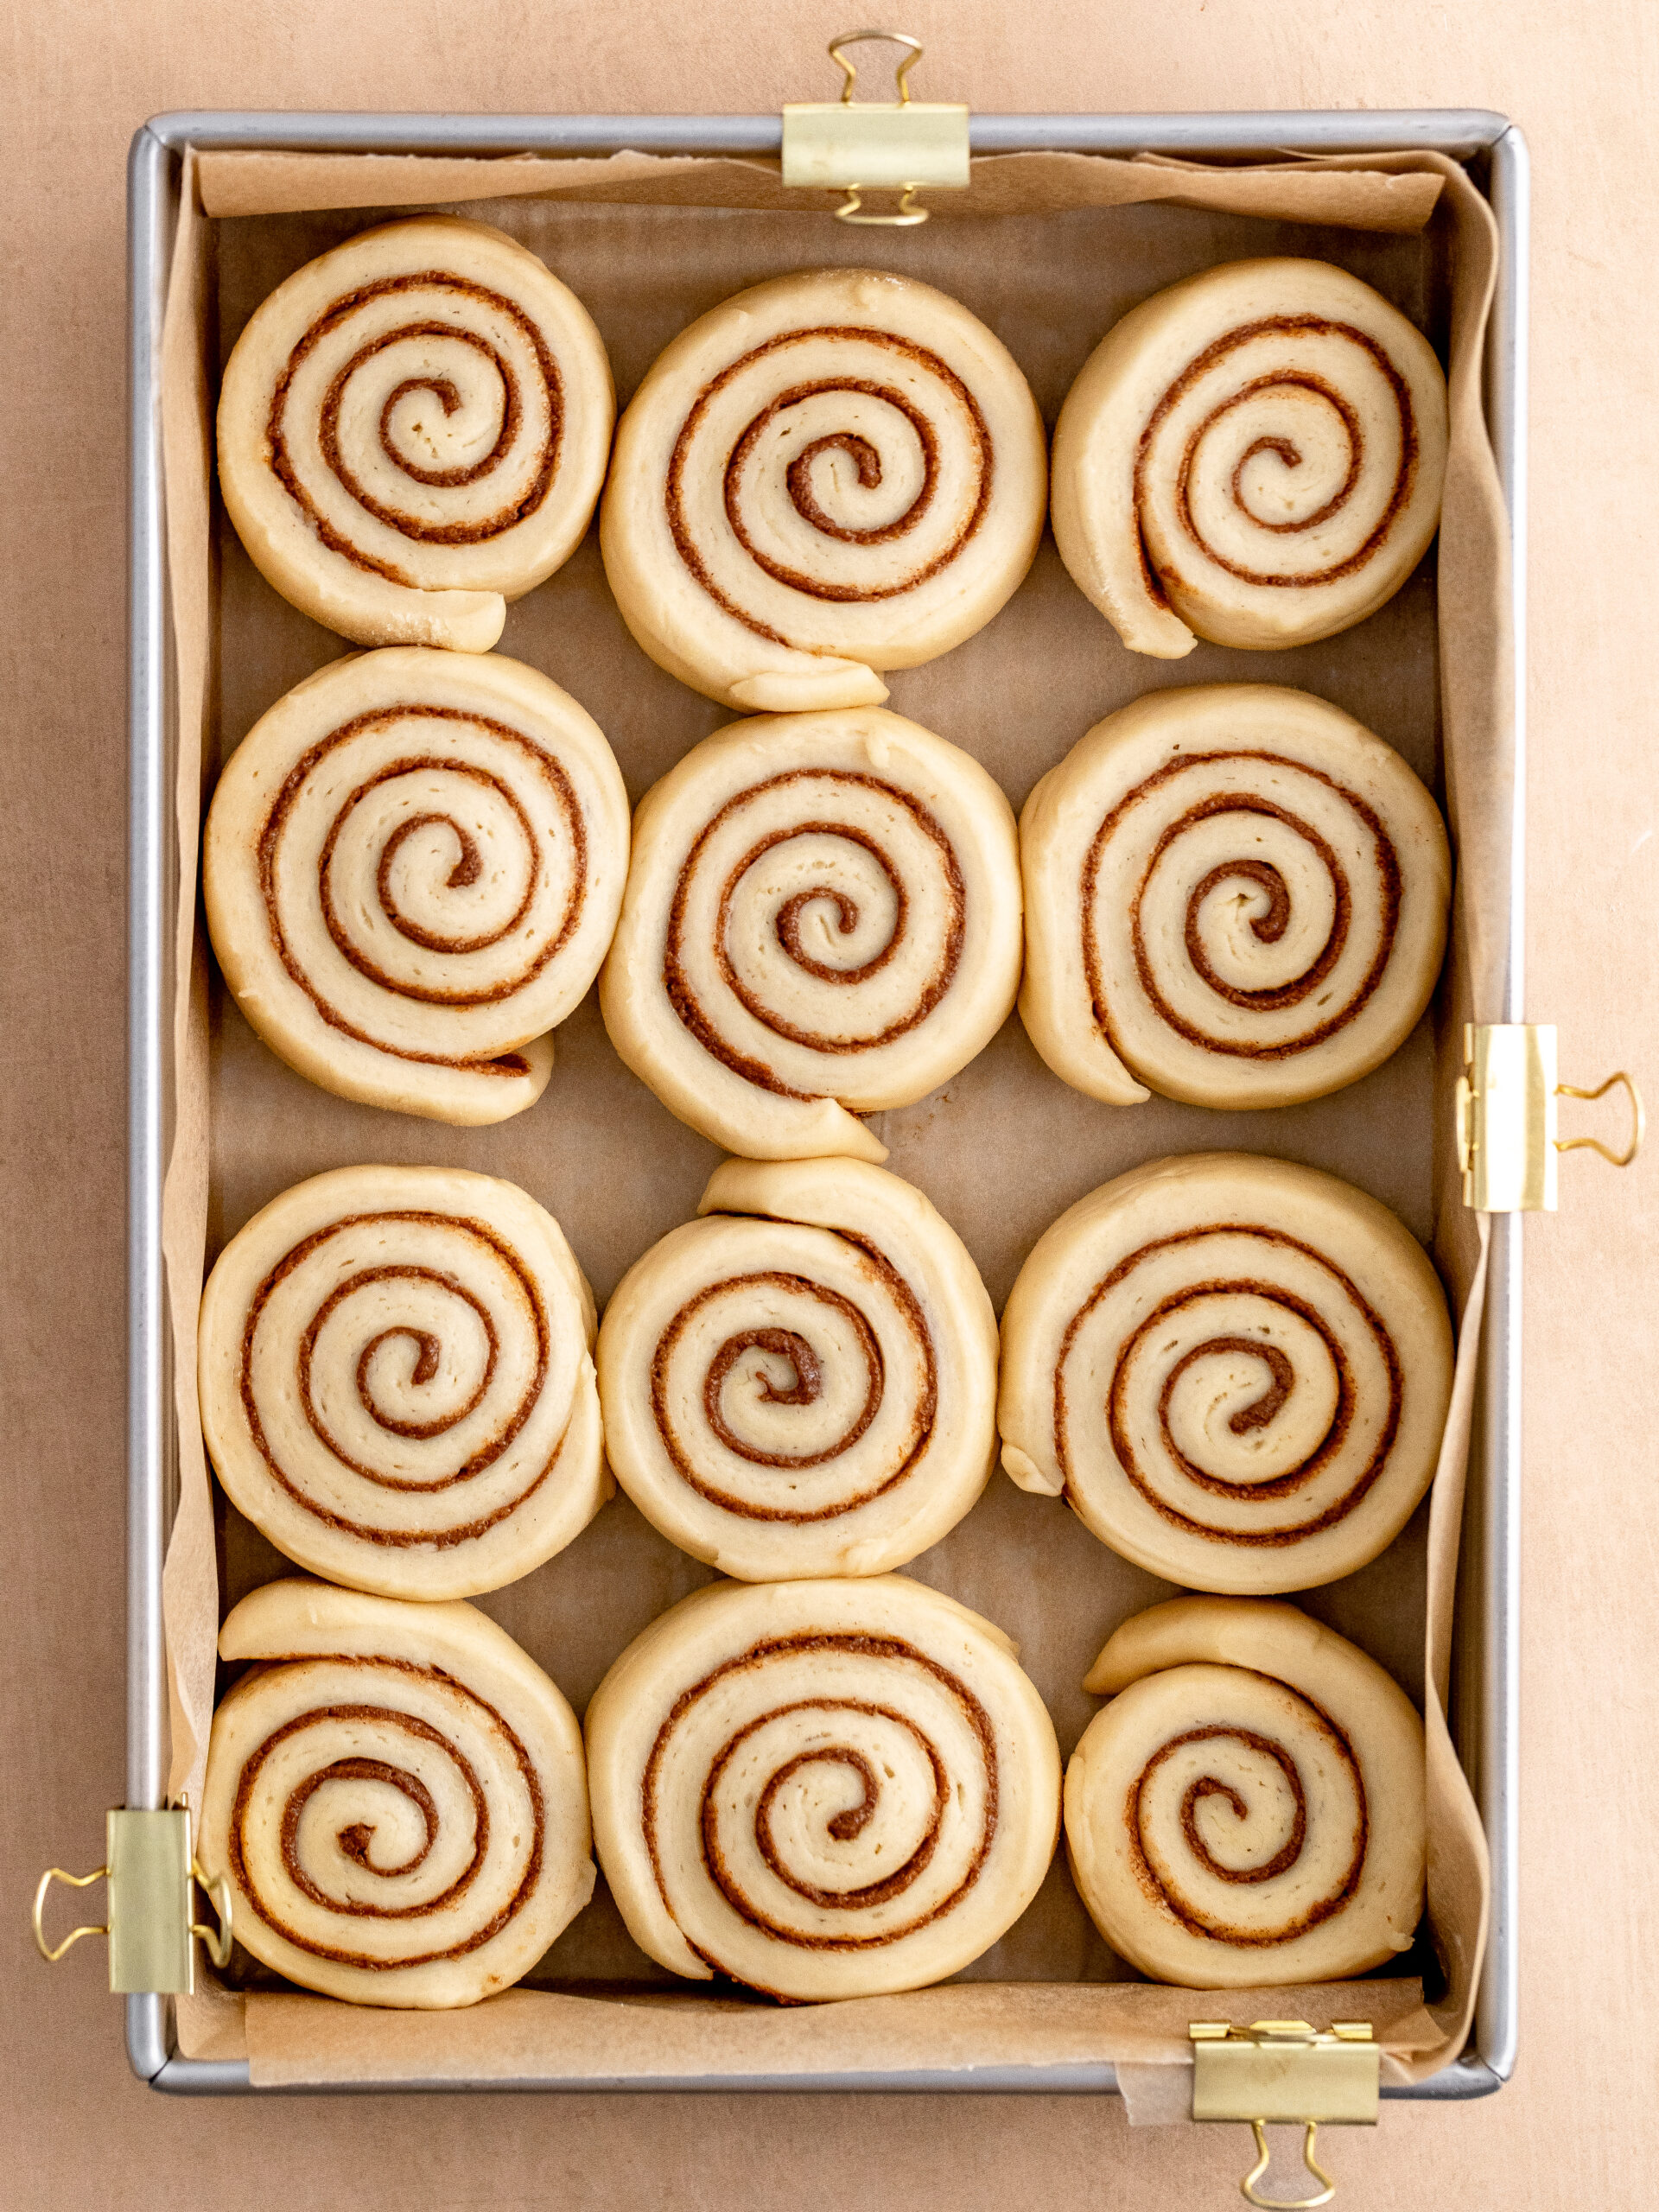 Cinnamon rolls in the baking tray, after the 2nd rise, ready to go into the oven.